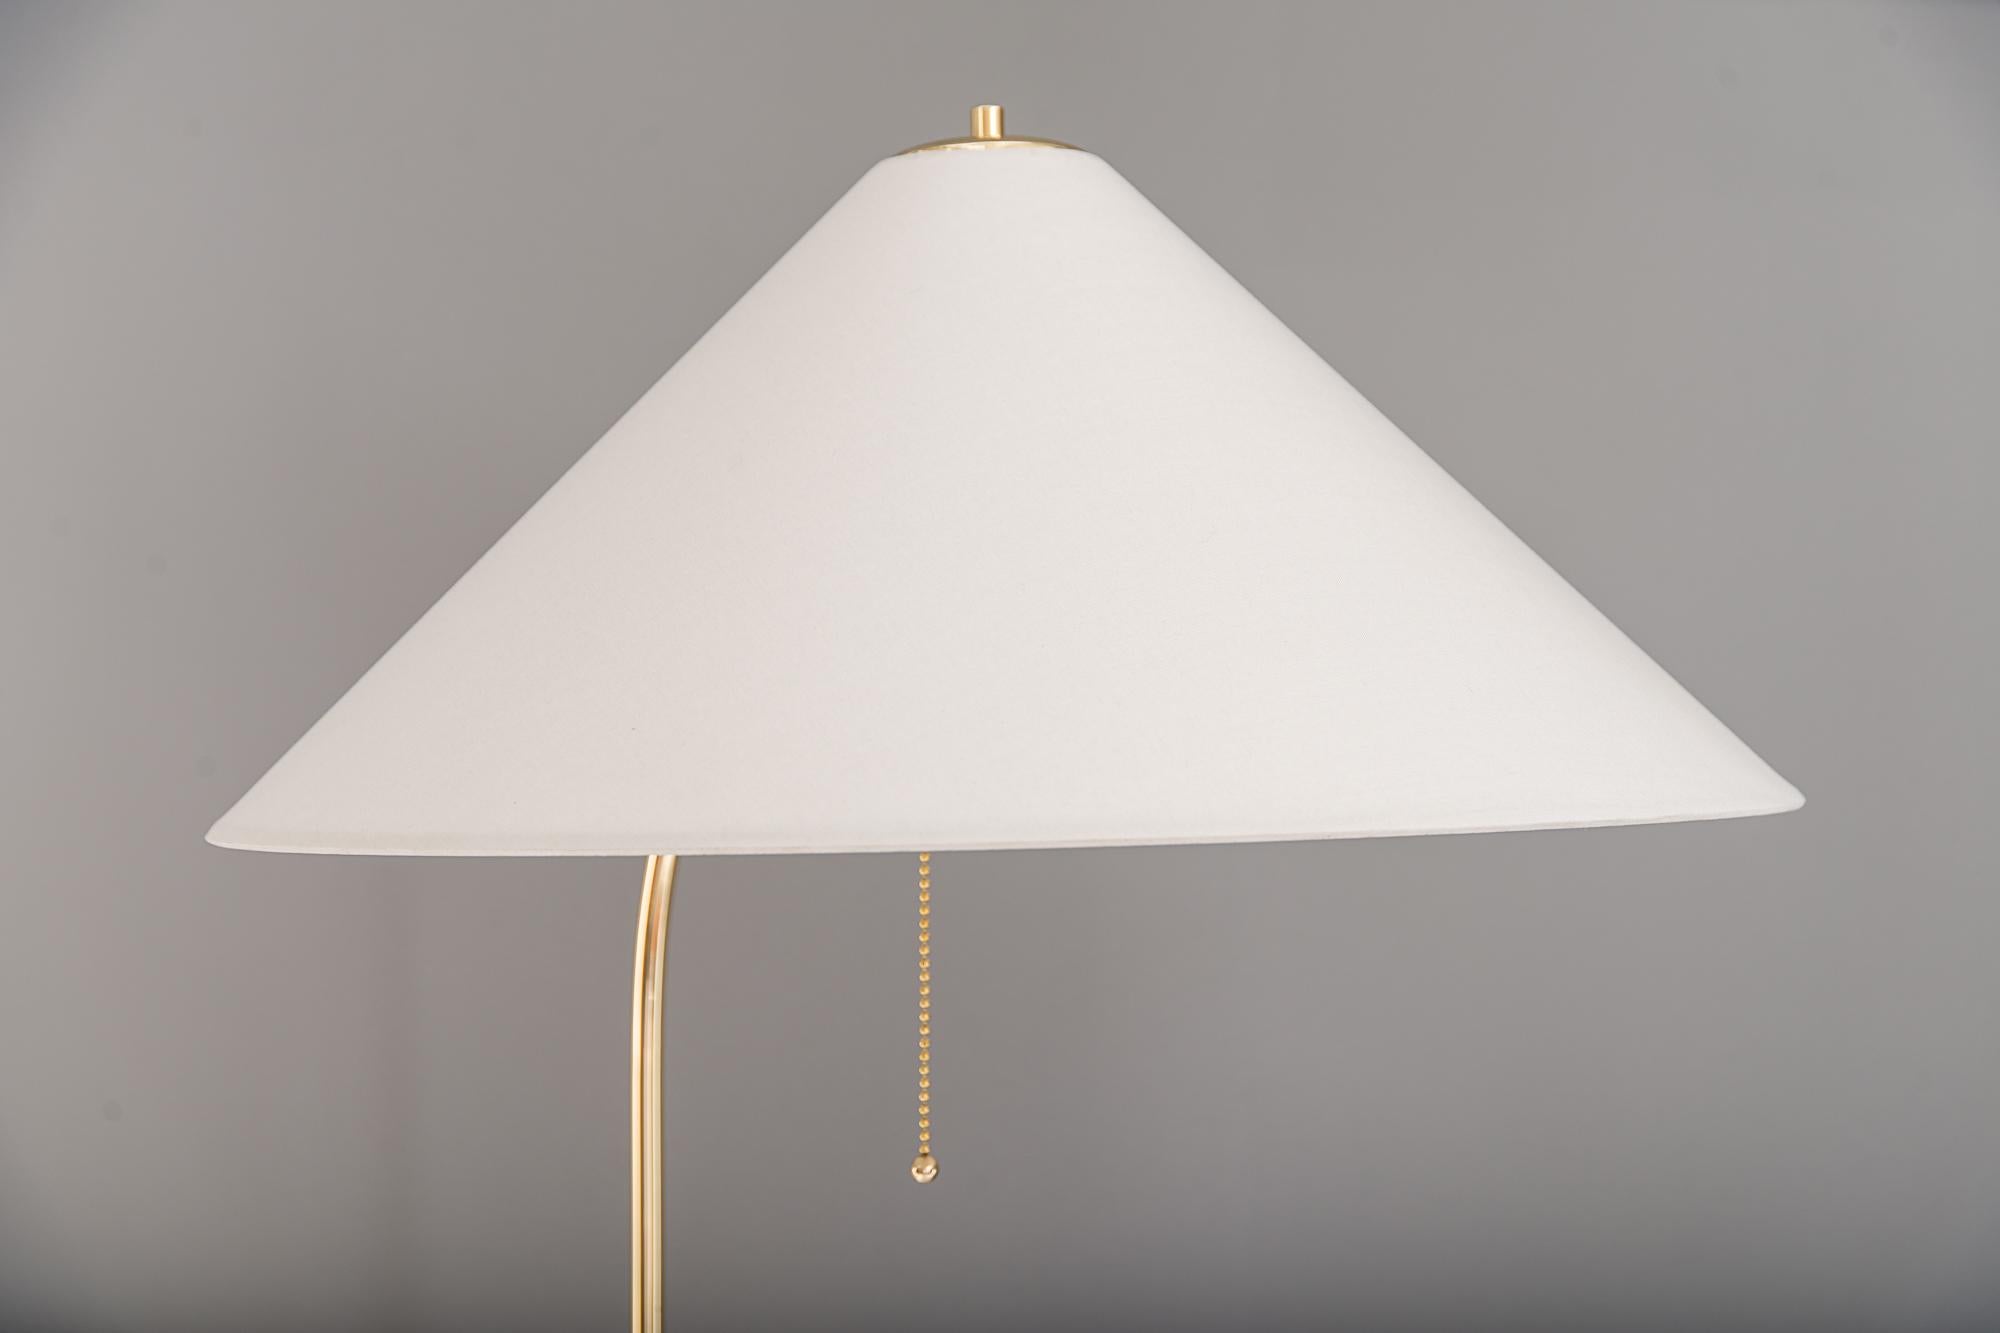 Floor lamp by Rupert Nikoll, Vienna, 1950s
Polished and stove enameled
The lamp shades have been renewed as well based on the original dimensions.